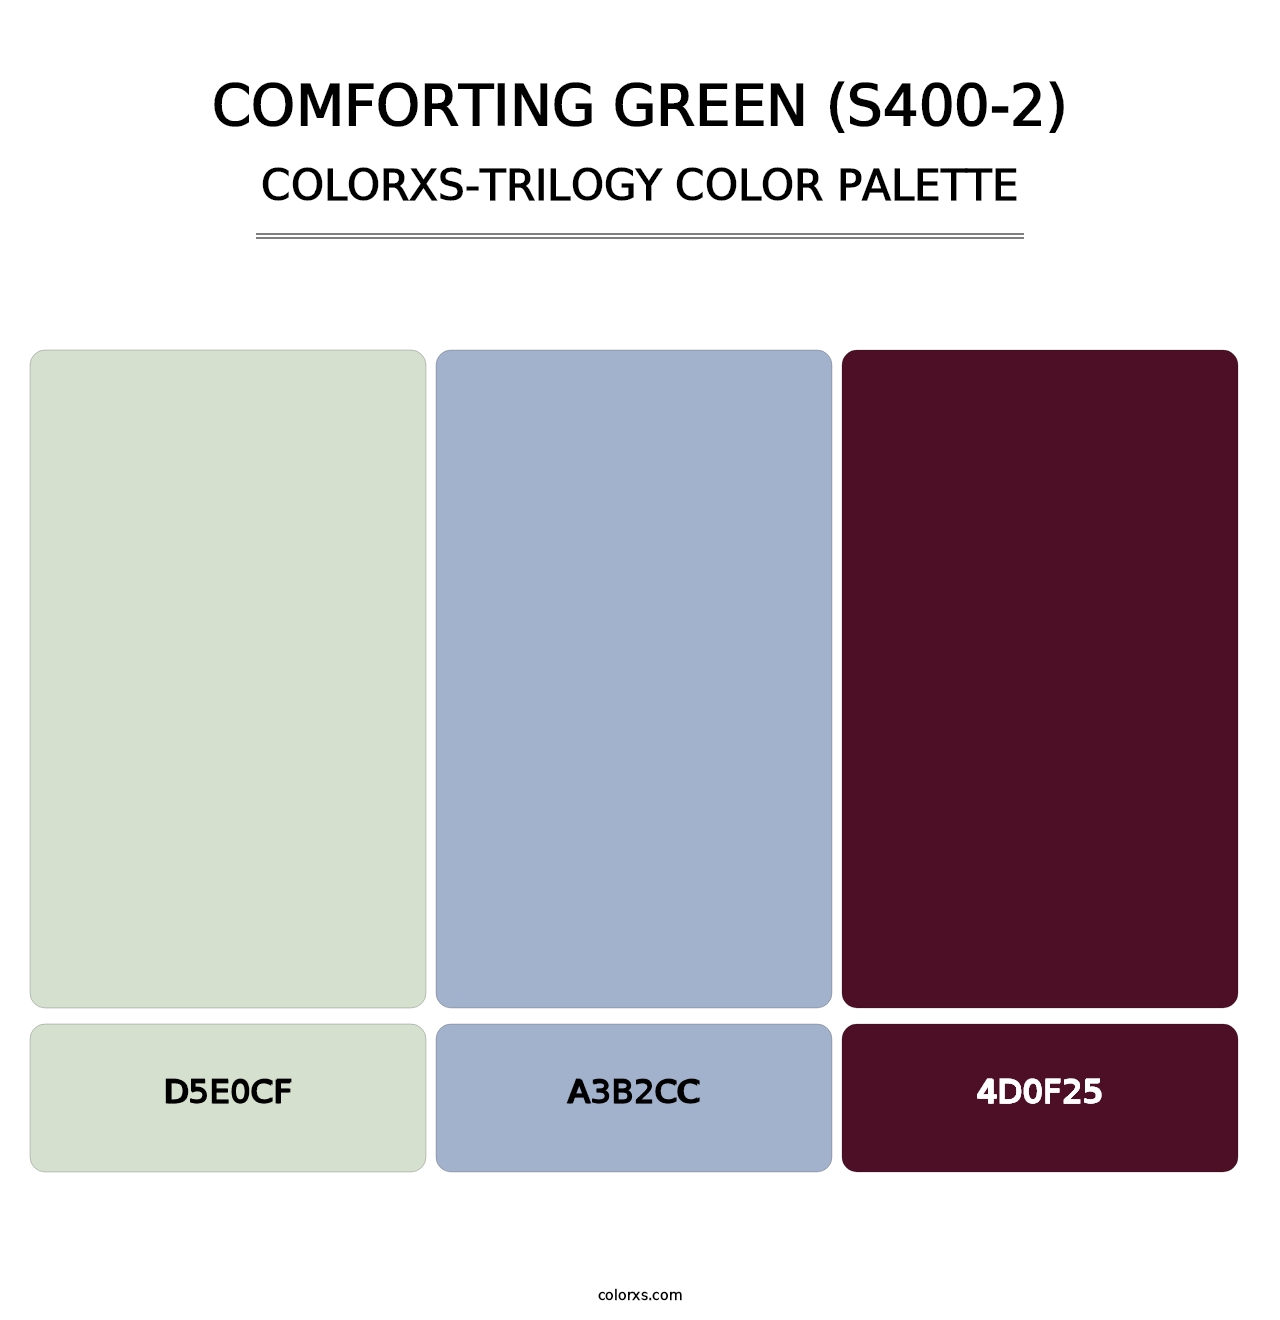 Comforting Green (S400-2) - Colorxs Trilogy Palette